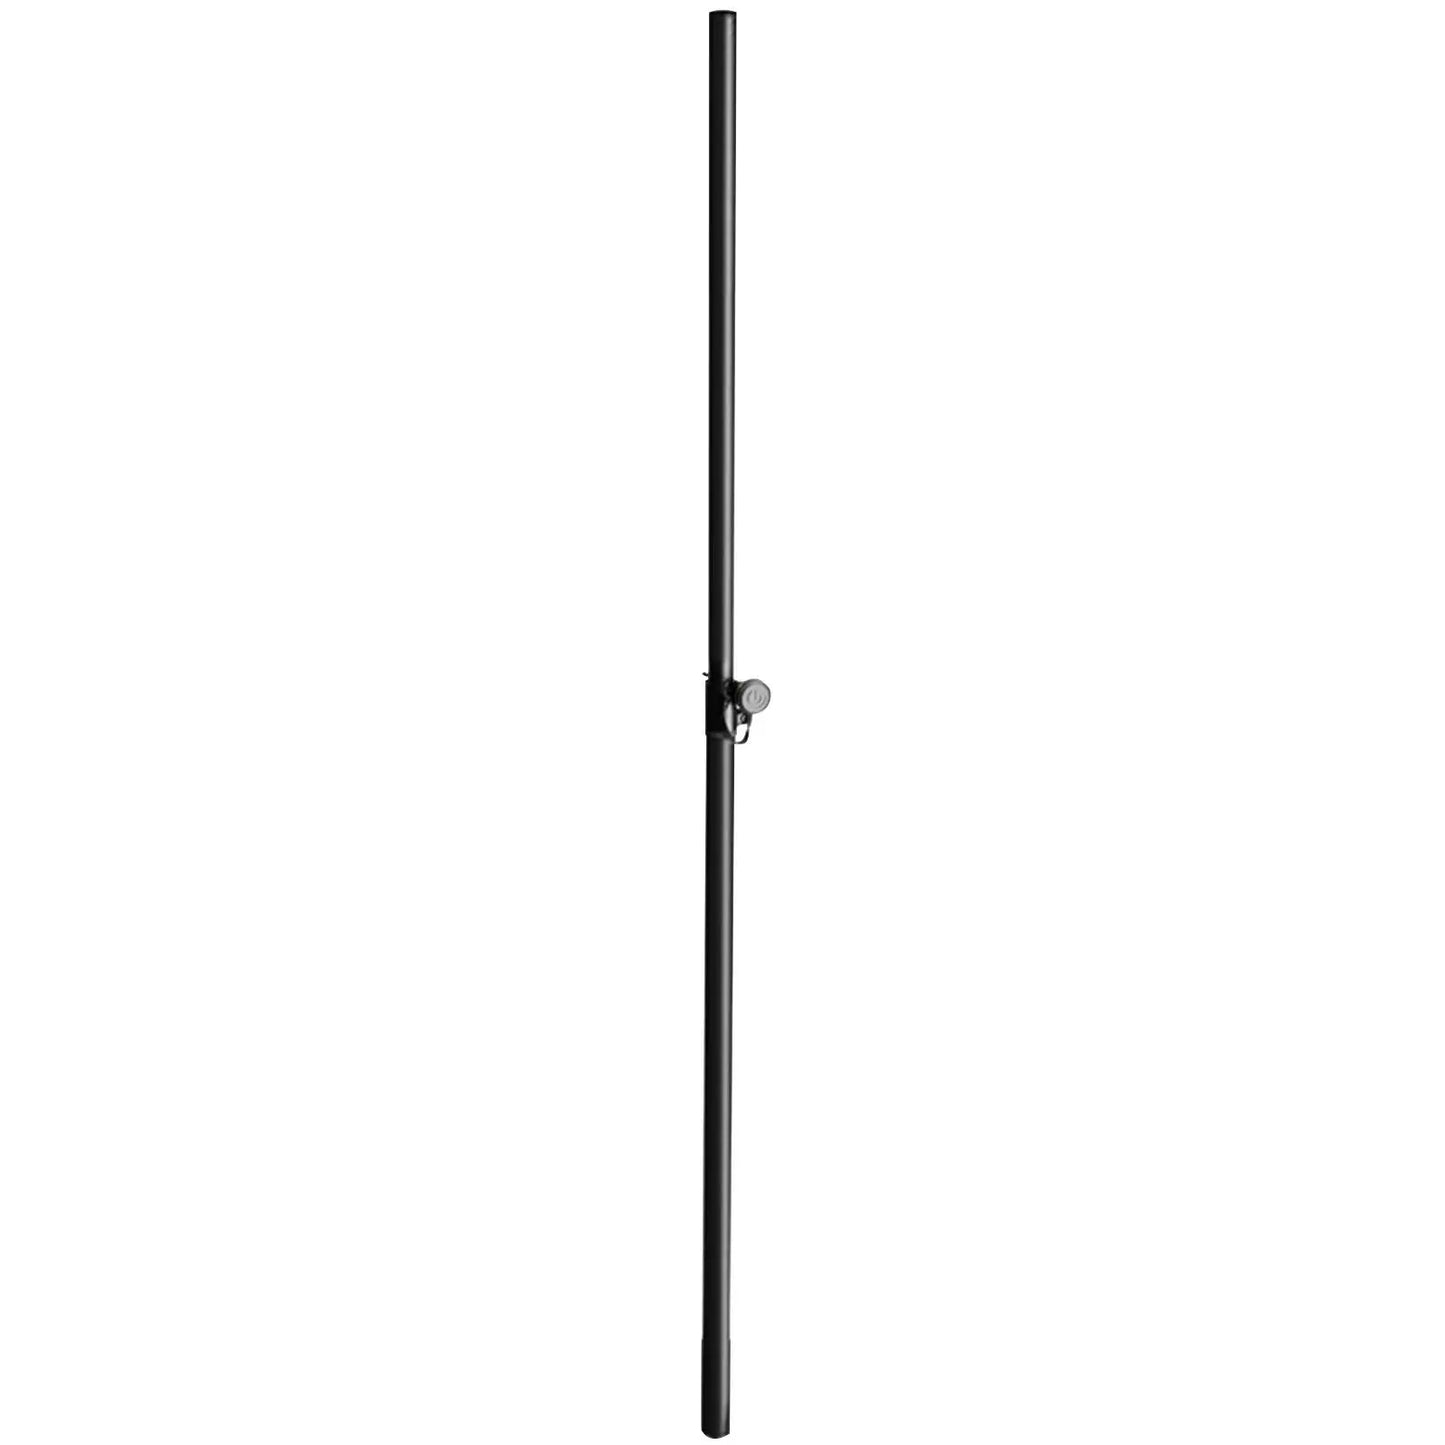 Gravity Stands GXSP1076 Replacement Pole for LS 331 B/LS 431 B Stand